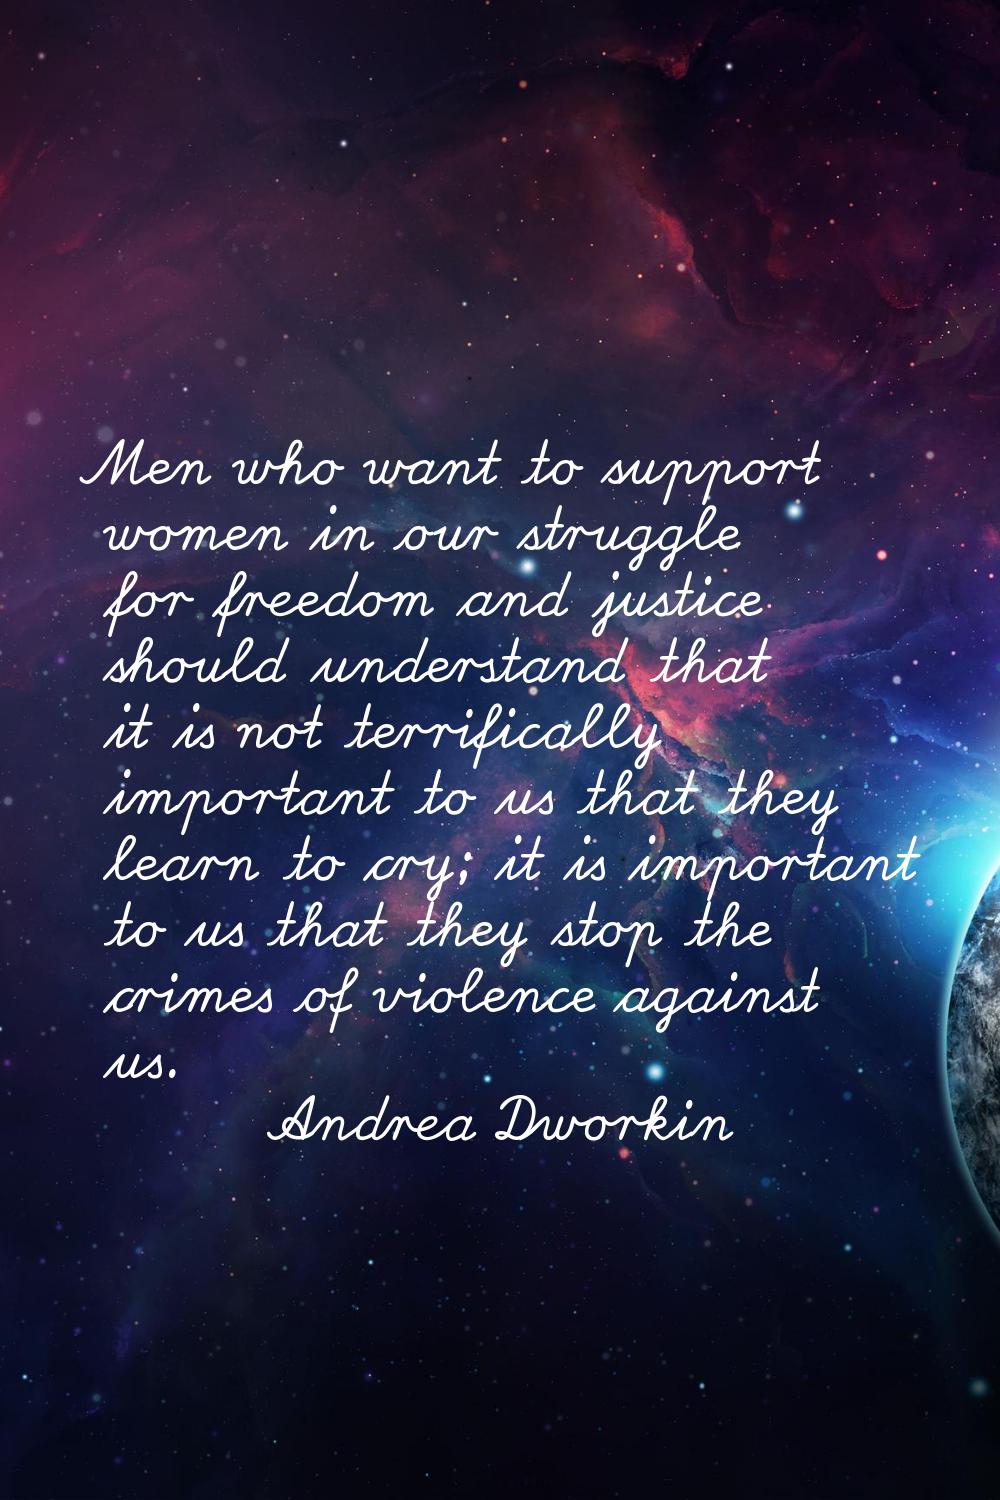 Men who want to support women in our struggle for freedom and justice should understand that it is 